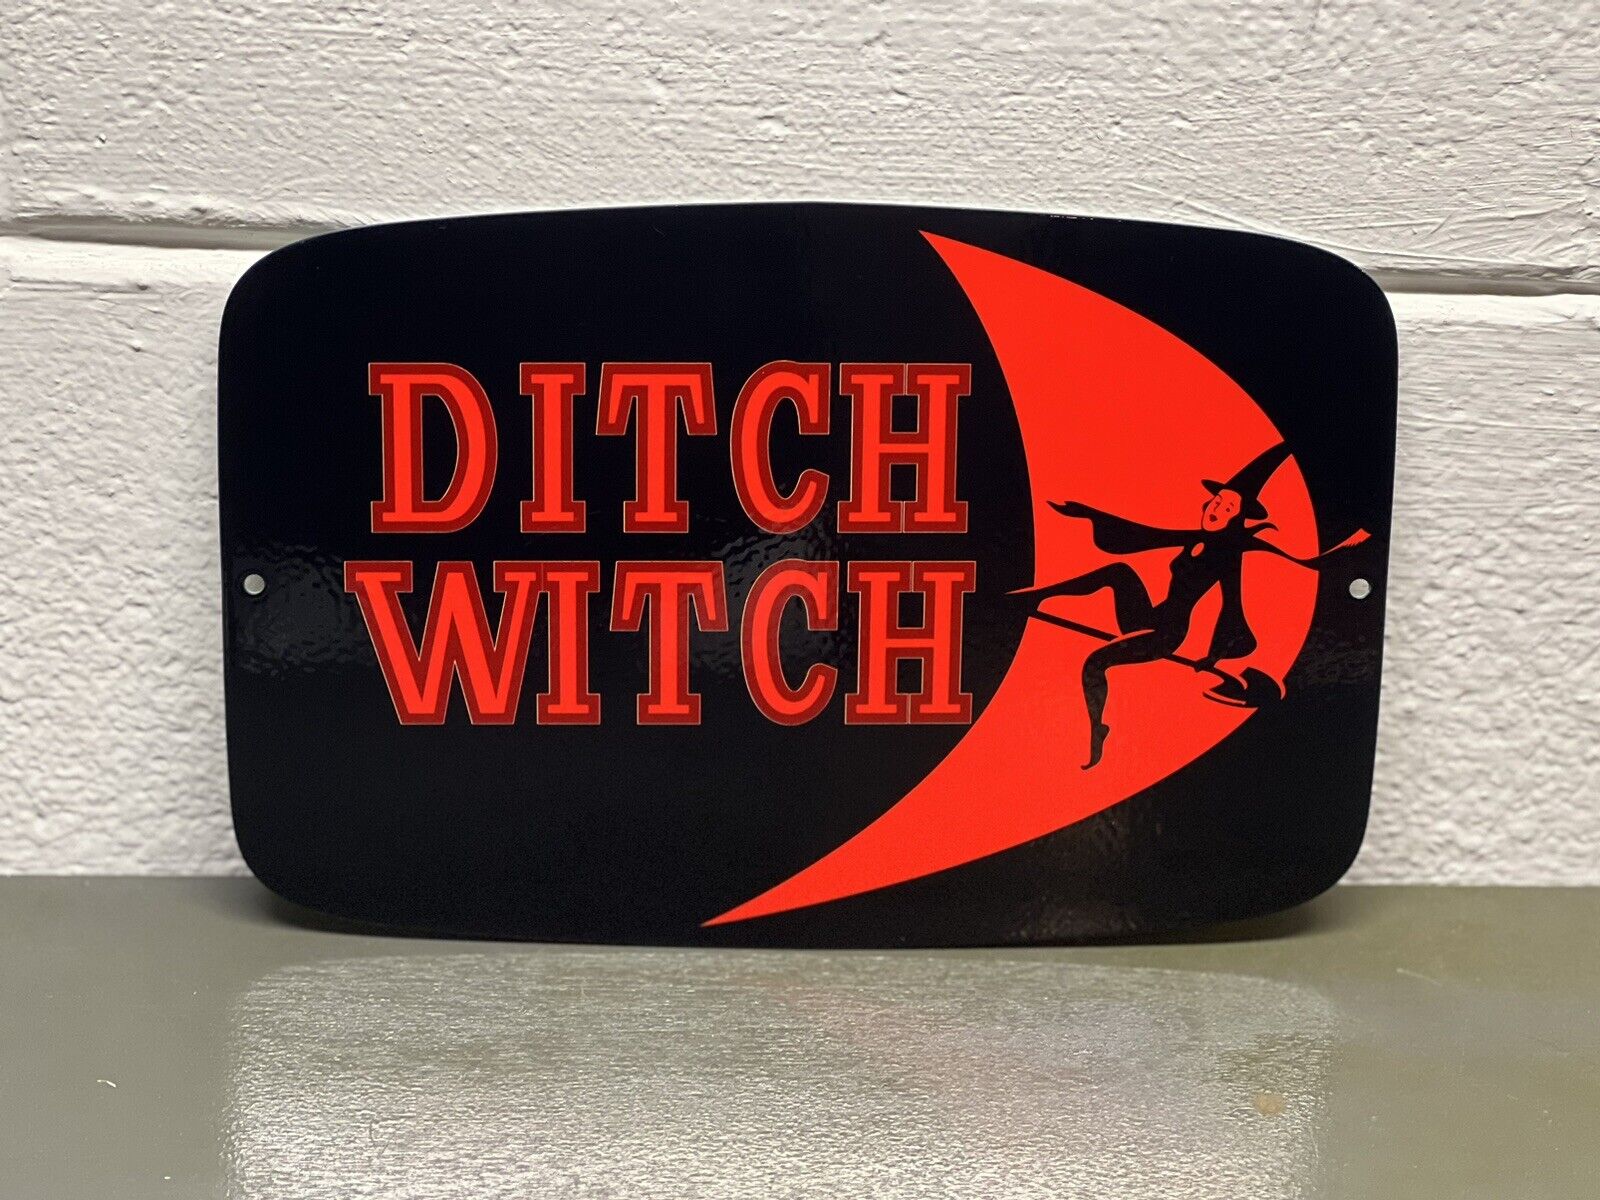 Ditch Witch Thick Metal Sign Construction Charles Machine Works Gas Oil Utility